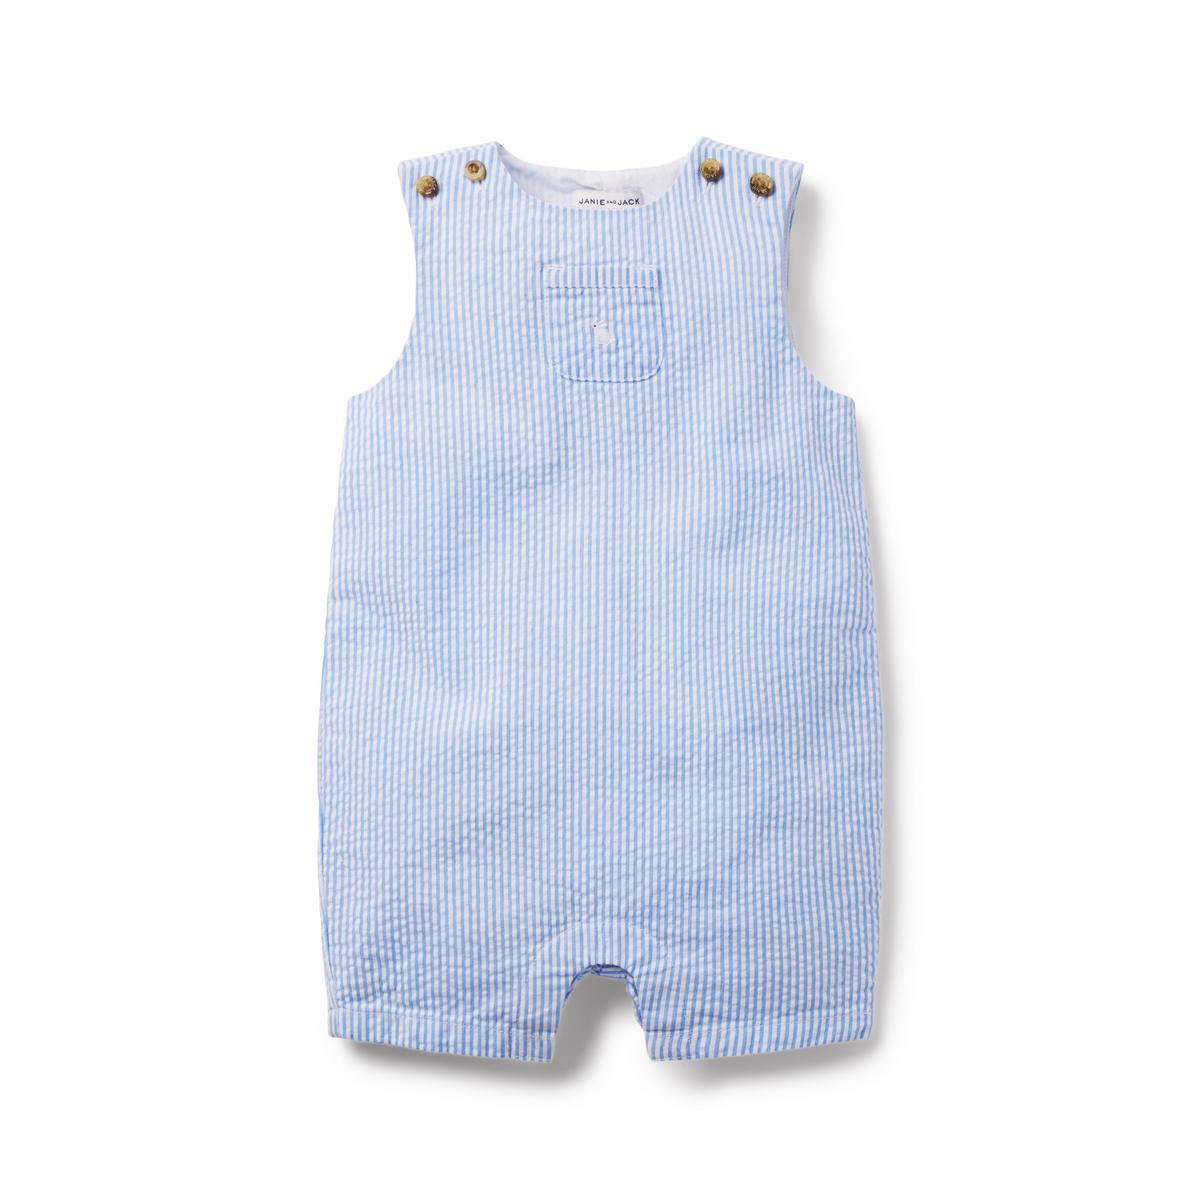 The Cutest Summer Baby Clothes I'm Loving - JetsetChristina